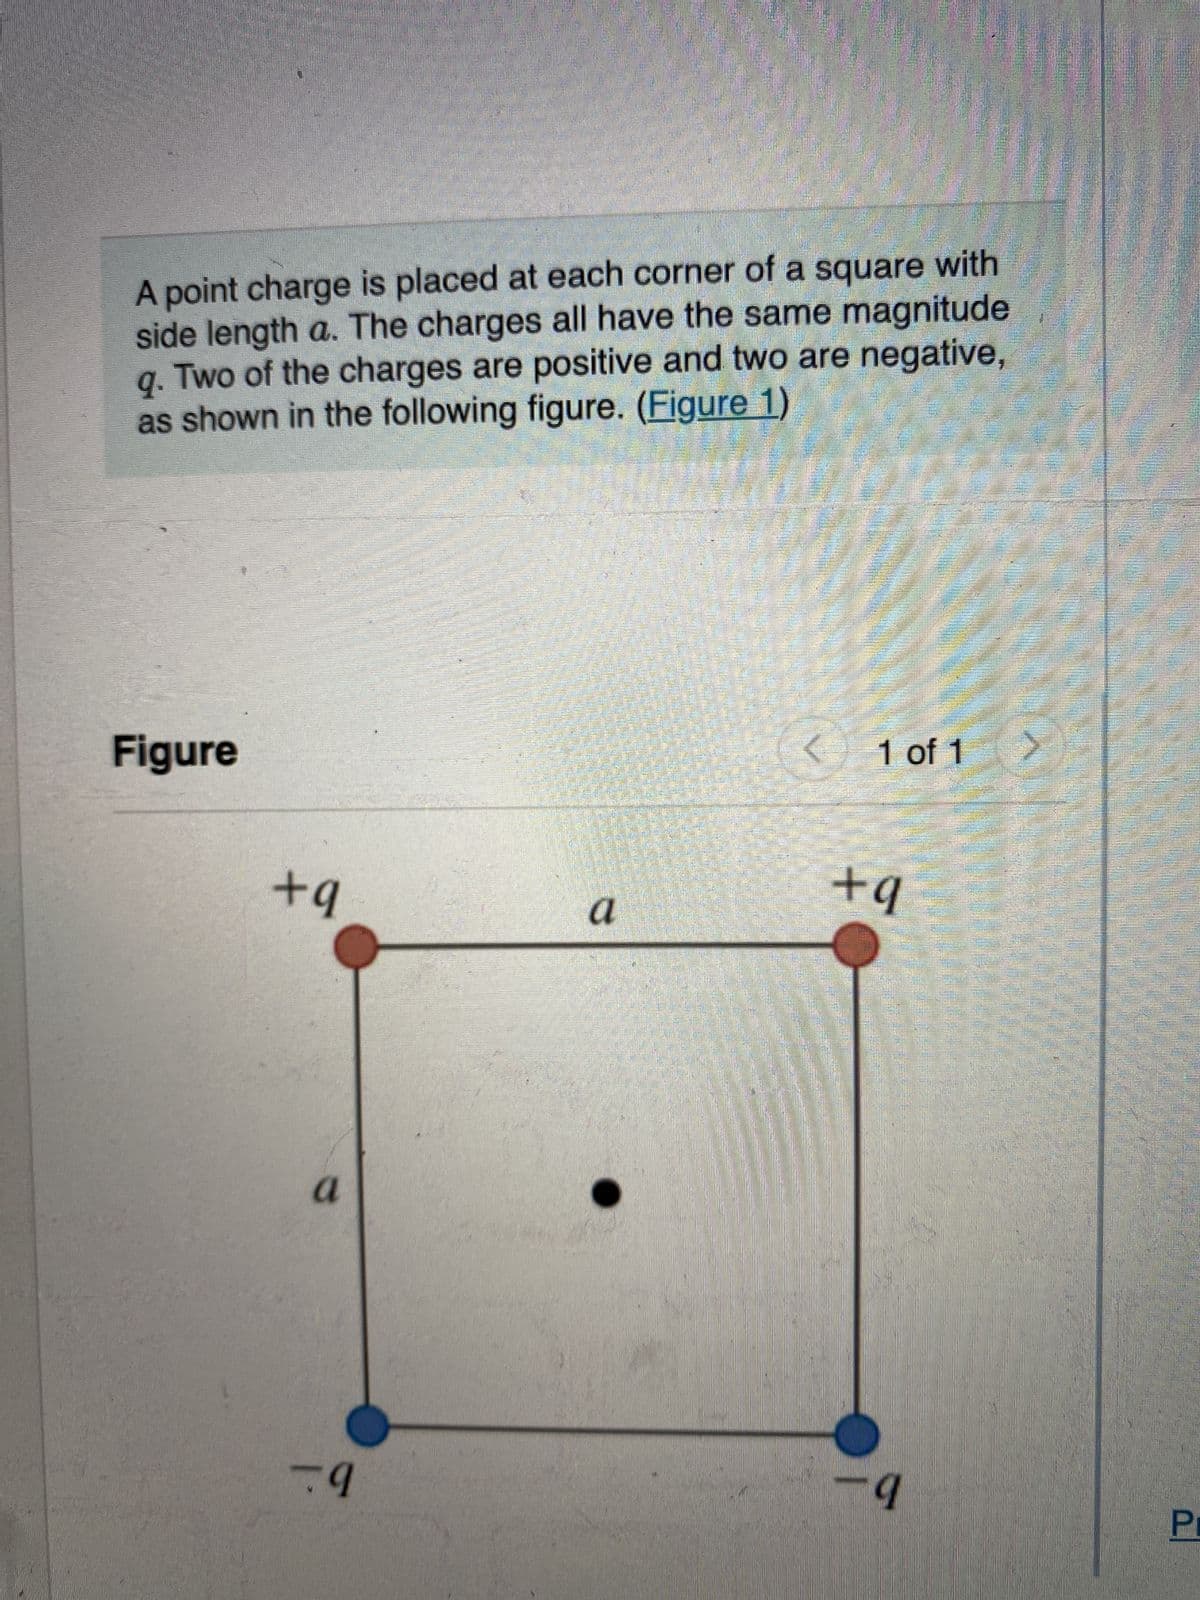 A point charge is placed at each corner of a square with
side length a. The charges all have the same magnitude 1
Two of the charges are positive and two are negative,
as shown in the following figure. (Figure 1)
9.
Figure
+q
a
9
a
< 1 of 1
+q
9
75
Pr